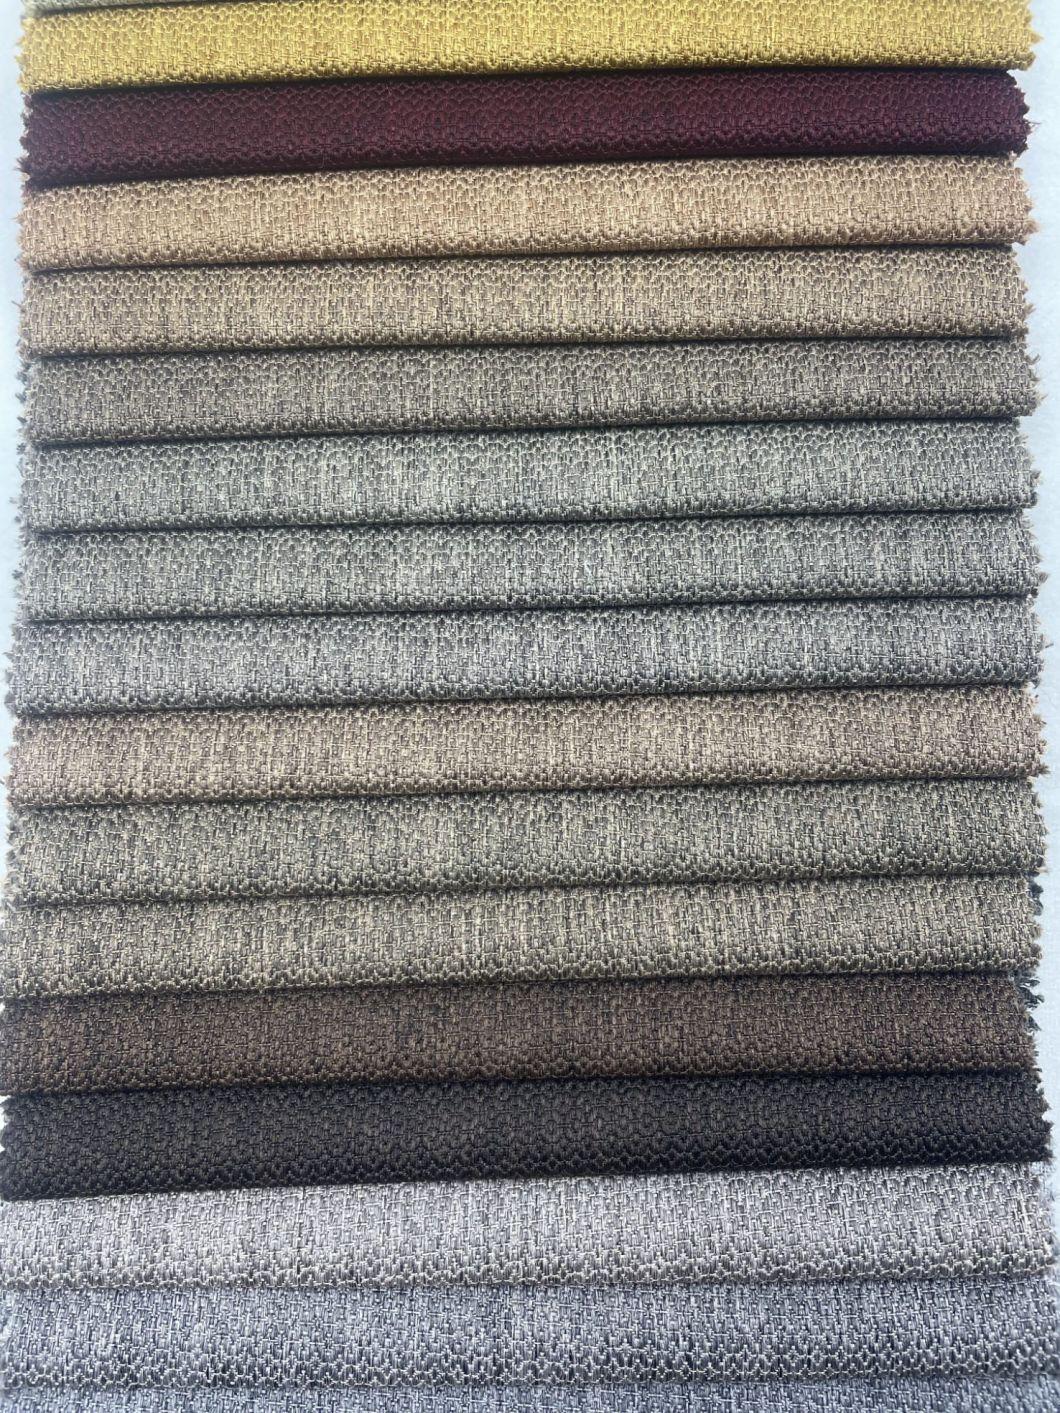 2022 China High Quality Polyester Plain Linen Upholstery Fabric for Sofa and Chair